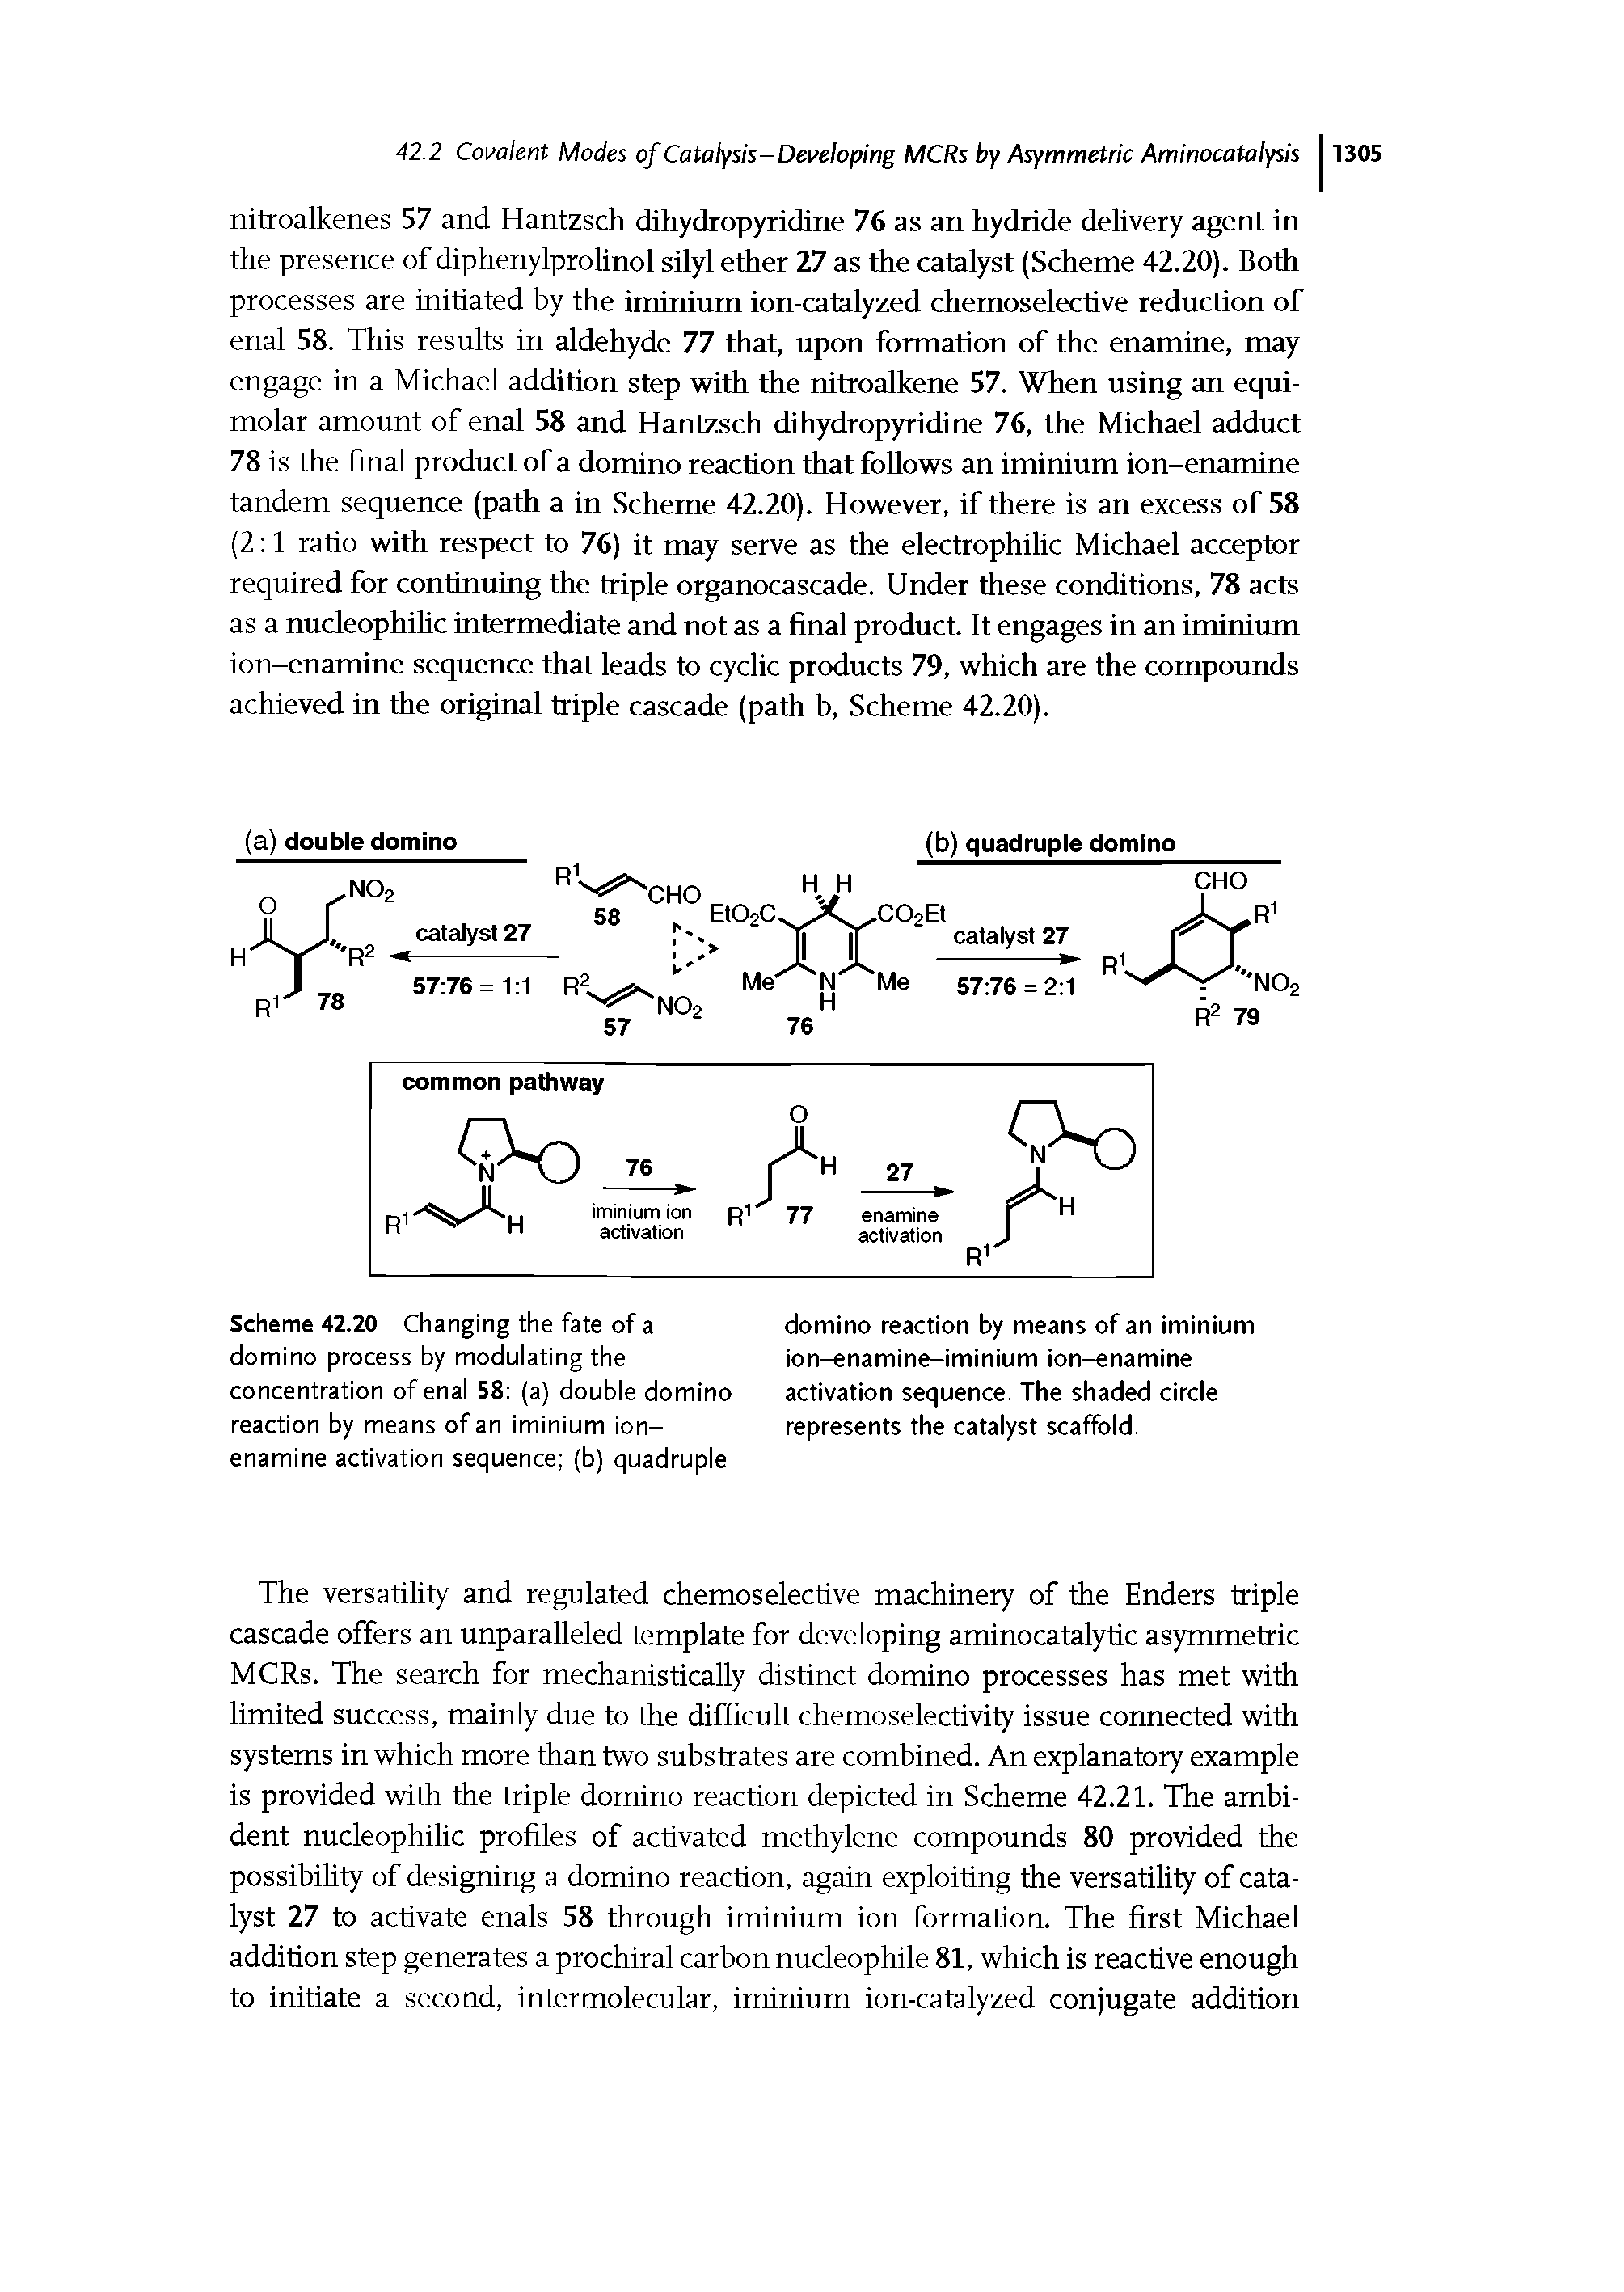 Scheme 42.20 Changing the fate of a domino process by modulating the concentration of enal 58 (a) double domino reaction by means of an iminium ion-enamine activation sequence (b) quadruple...